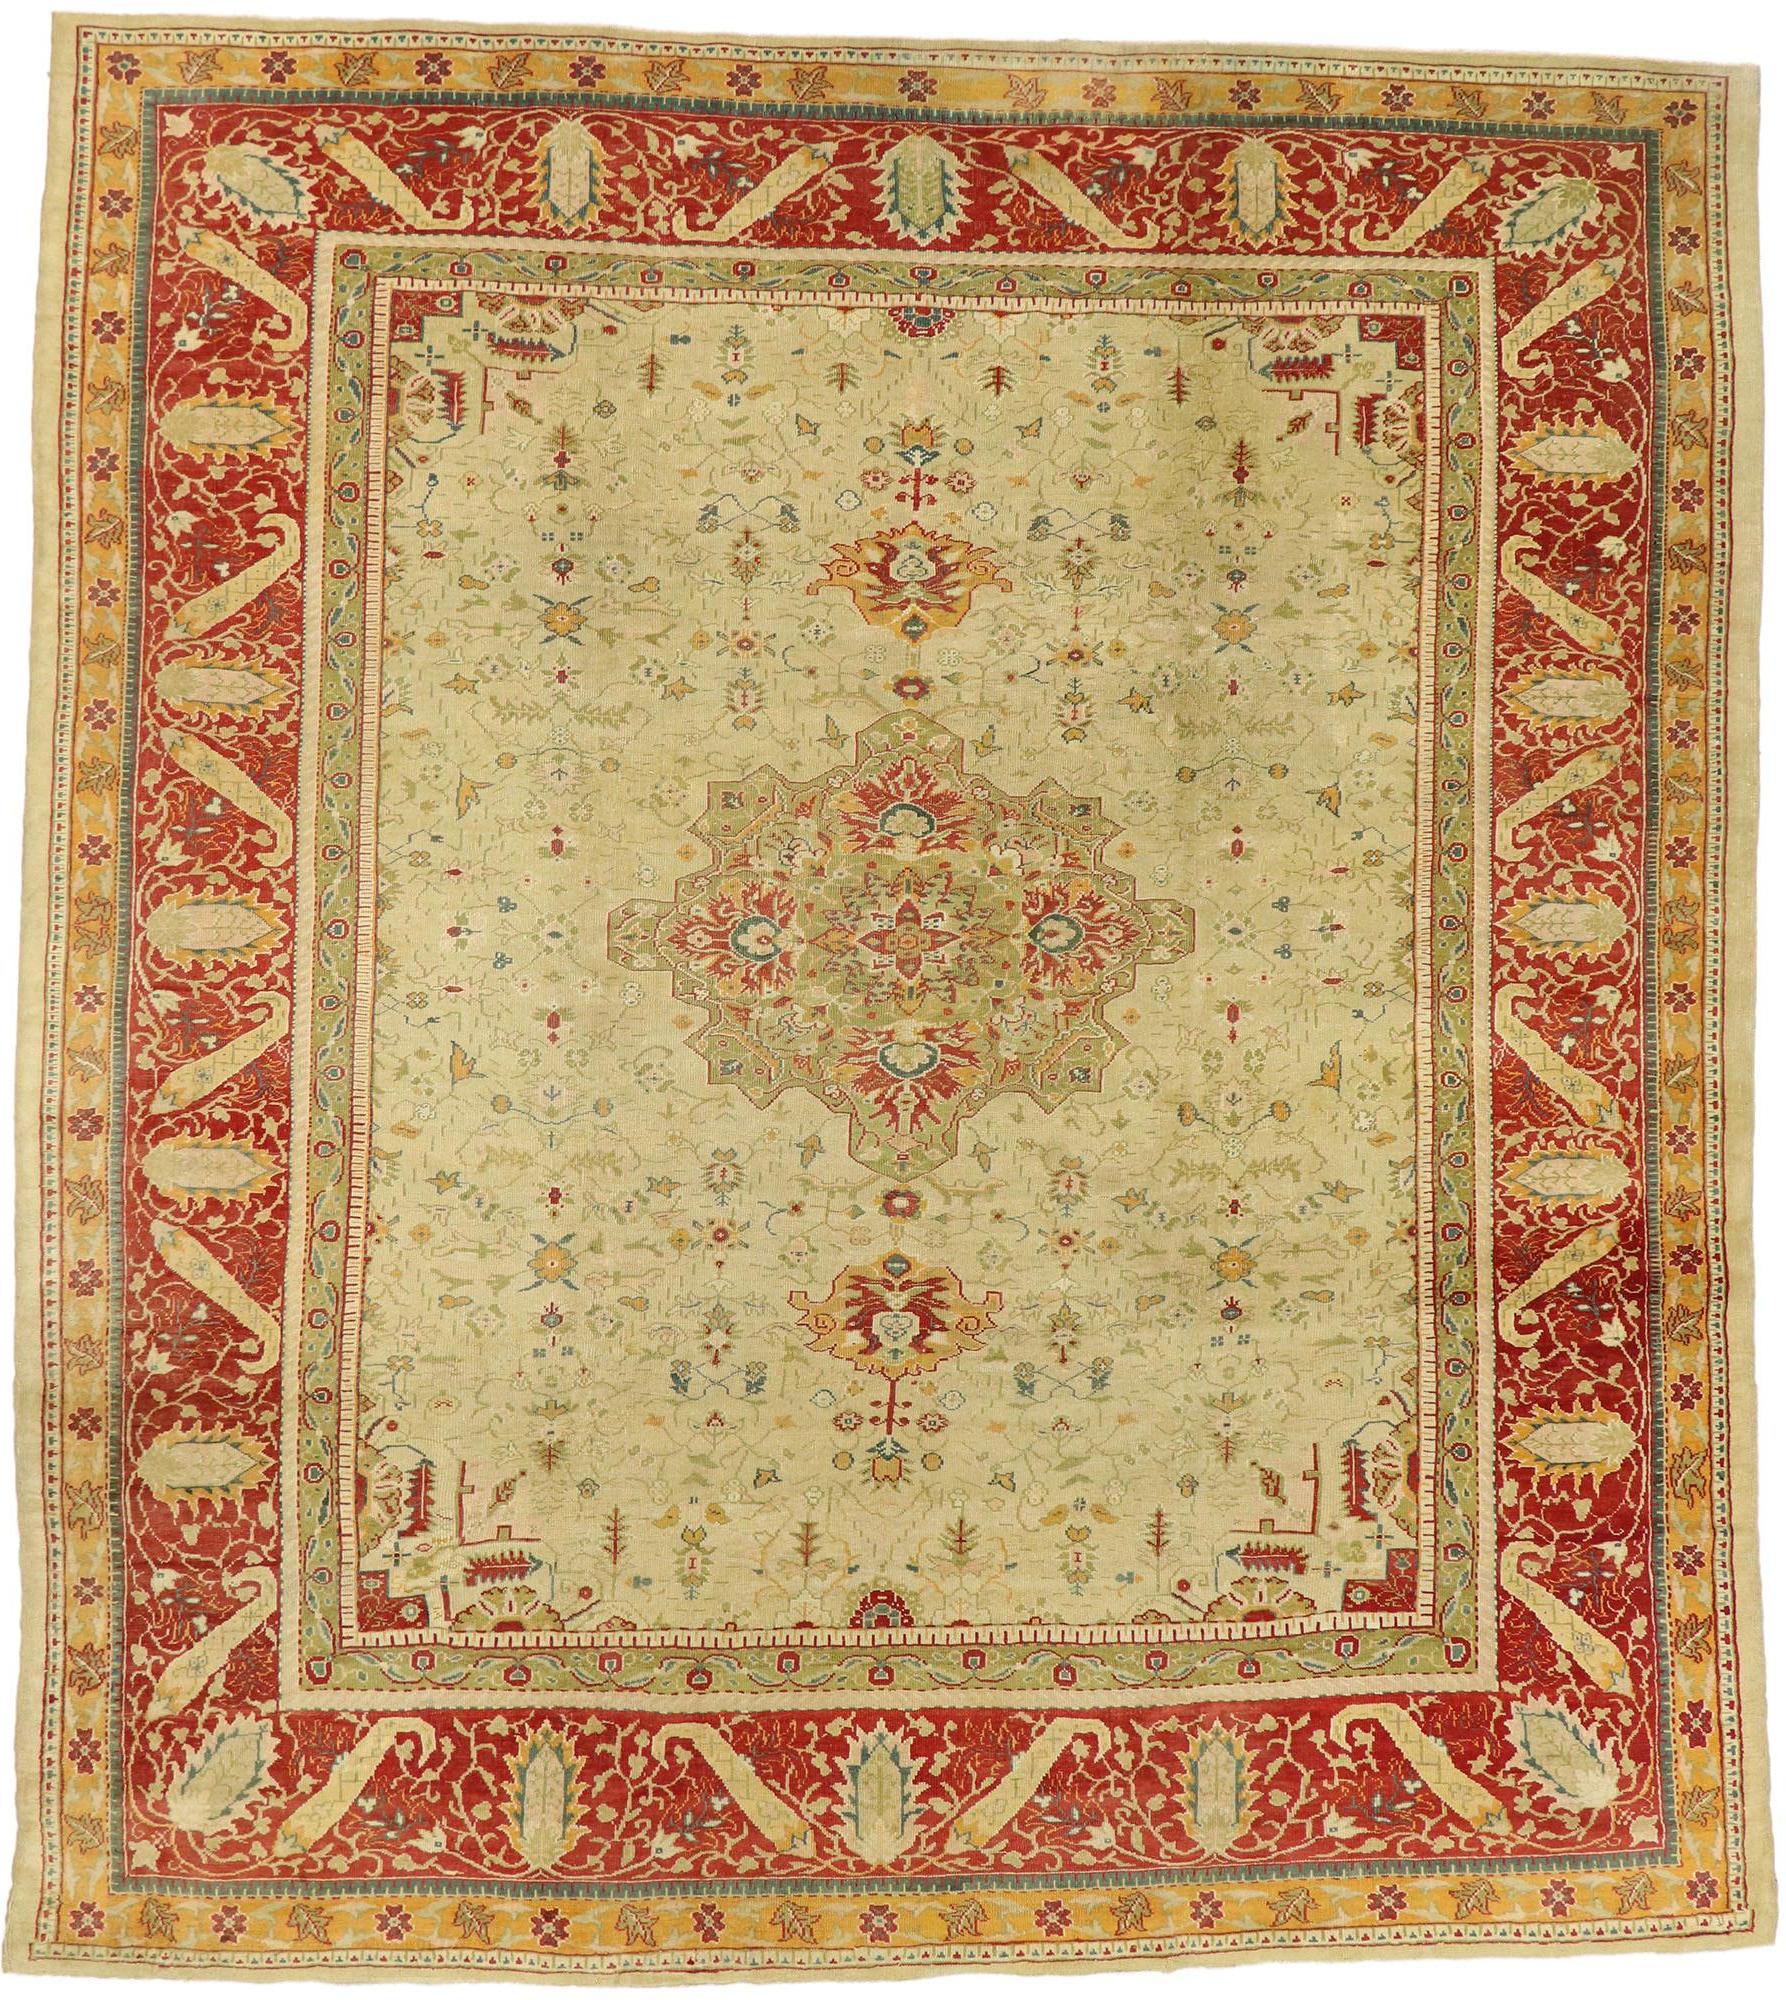 51879 Antique Turkish Oushak Rug with Traditional Modern Style 10’00 x 11’02 From Esmaili Rugs Collection. Displaying well-balanced asymmetry and timeless elegance, this hand-knotted wool antique Turkish Oushak rug beautifully is poised to impress.